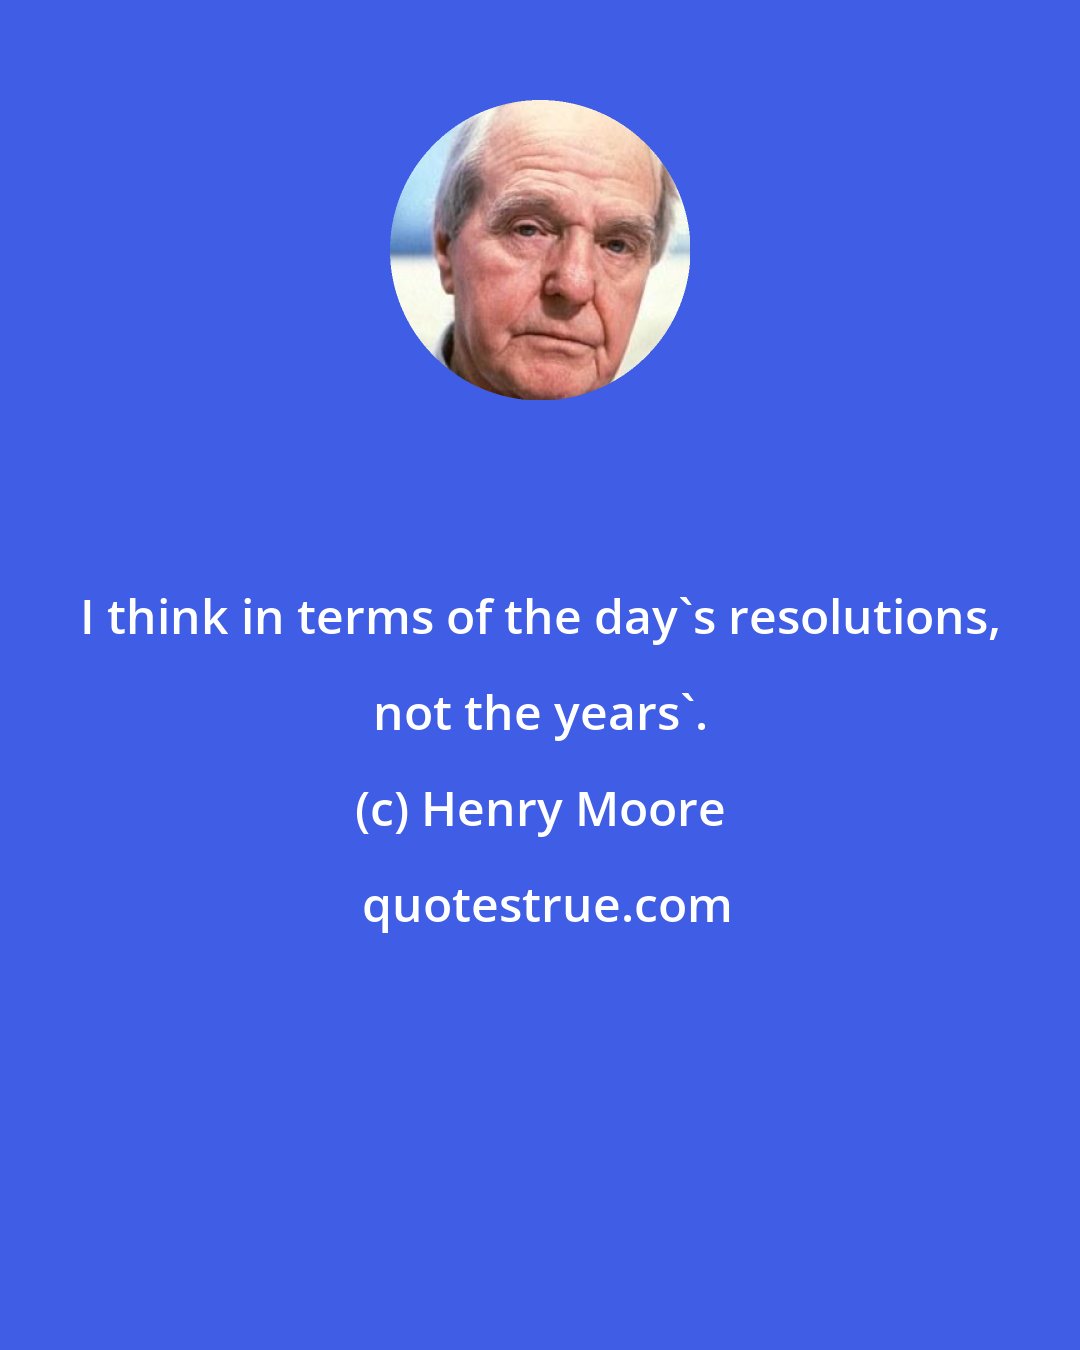 Henry Moore: I think in terms of the day's resolutions, not the years'.